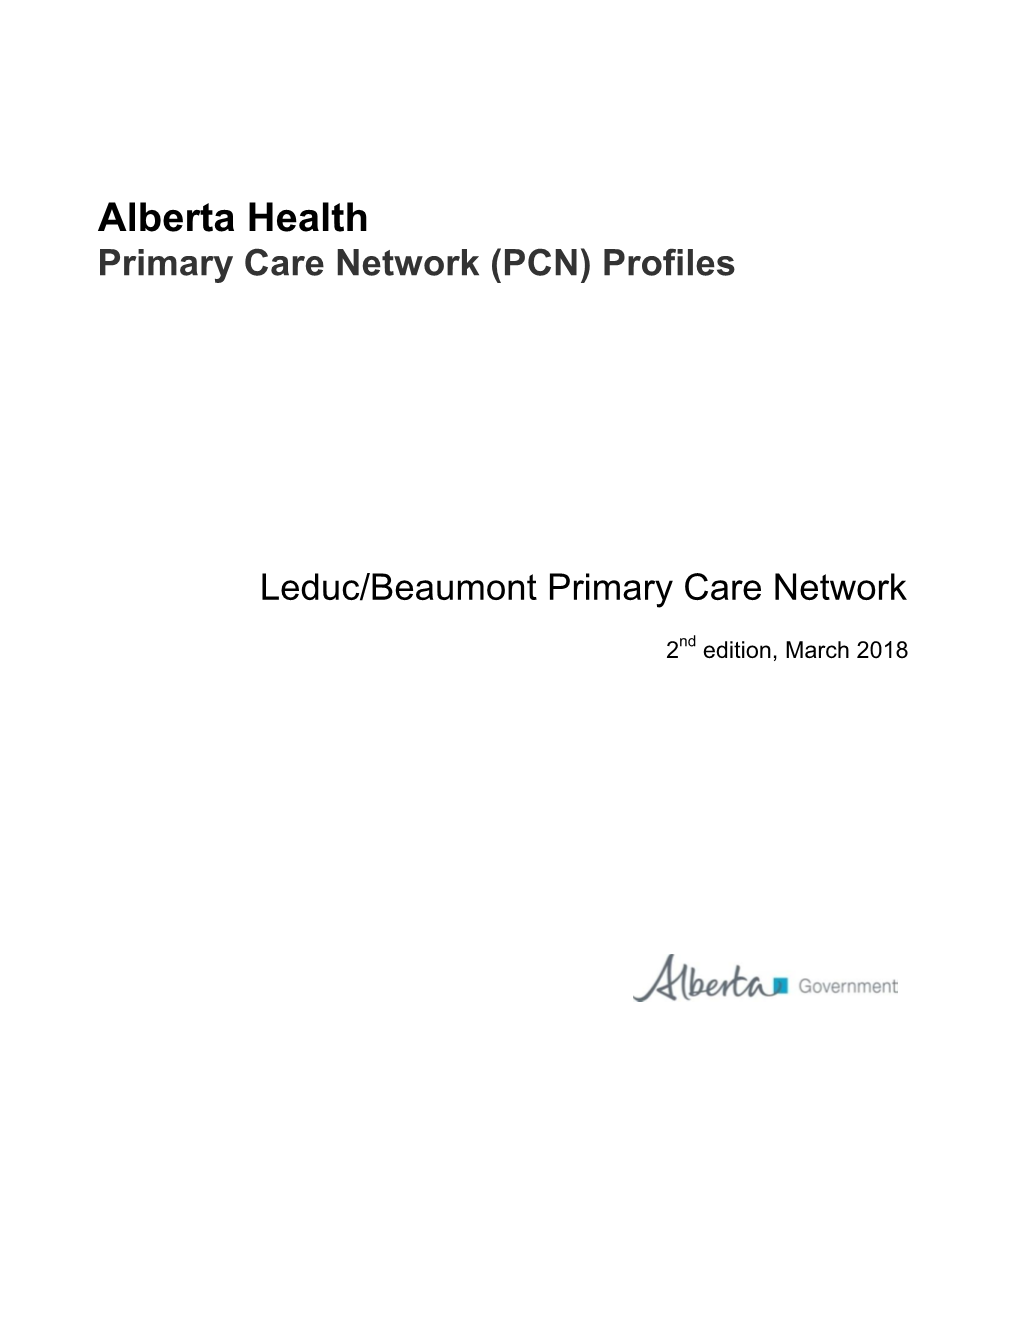 Leduc & Beaumont Primary Care Network